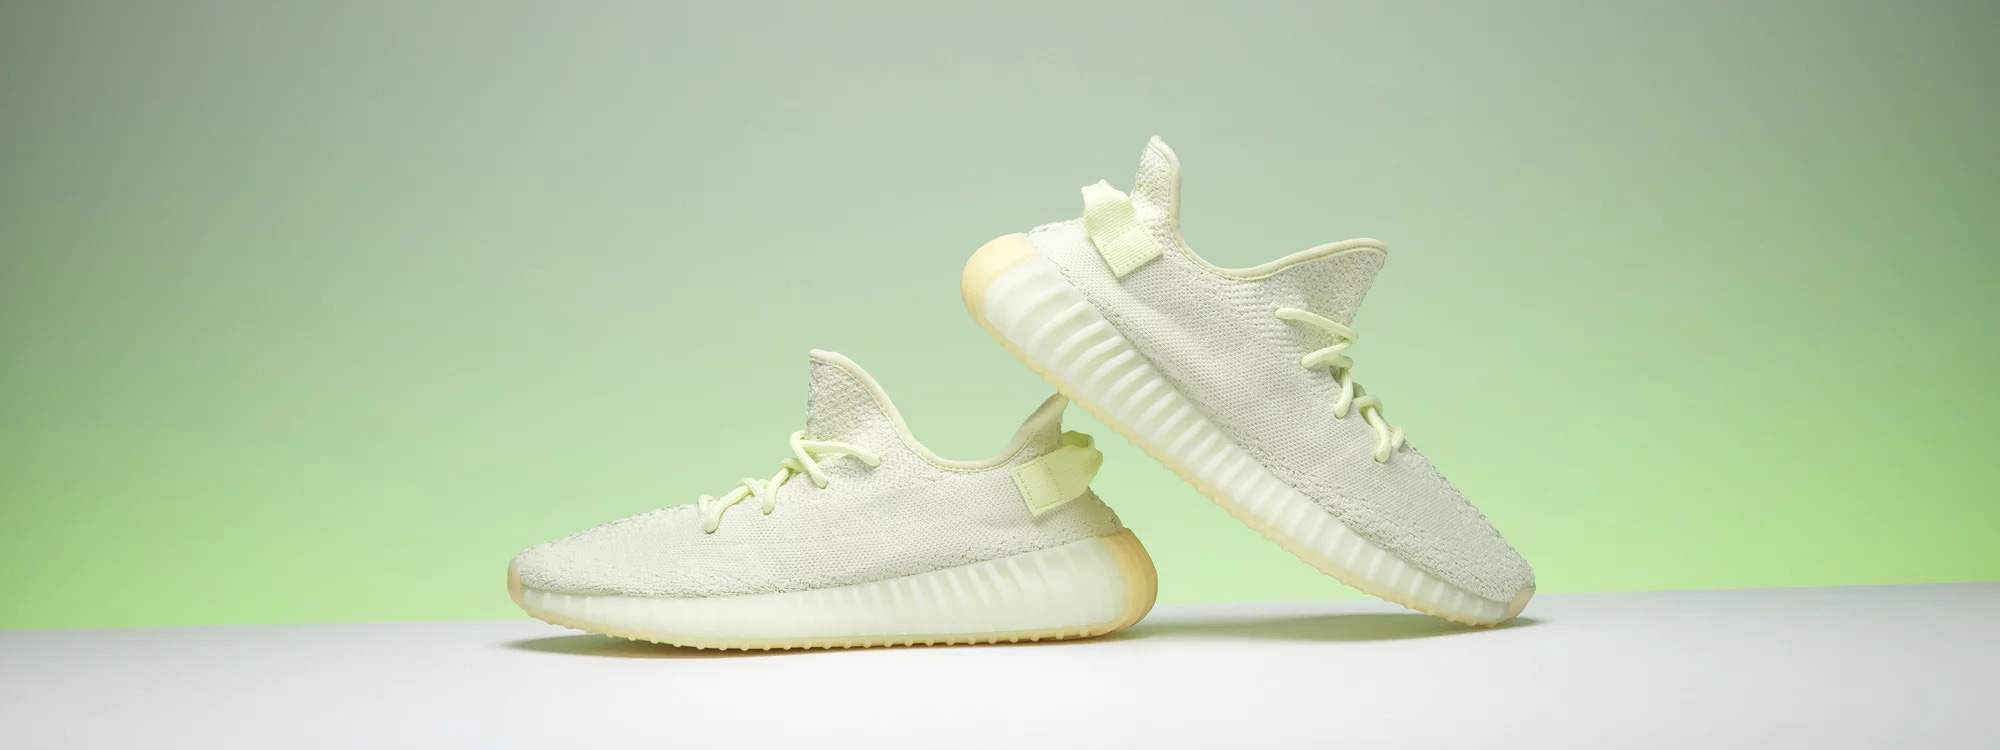 Price of Cheap Adidas Yeezy Boost 350 V2 Butter online